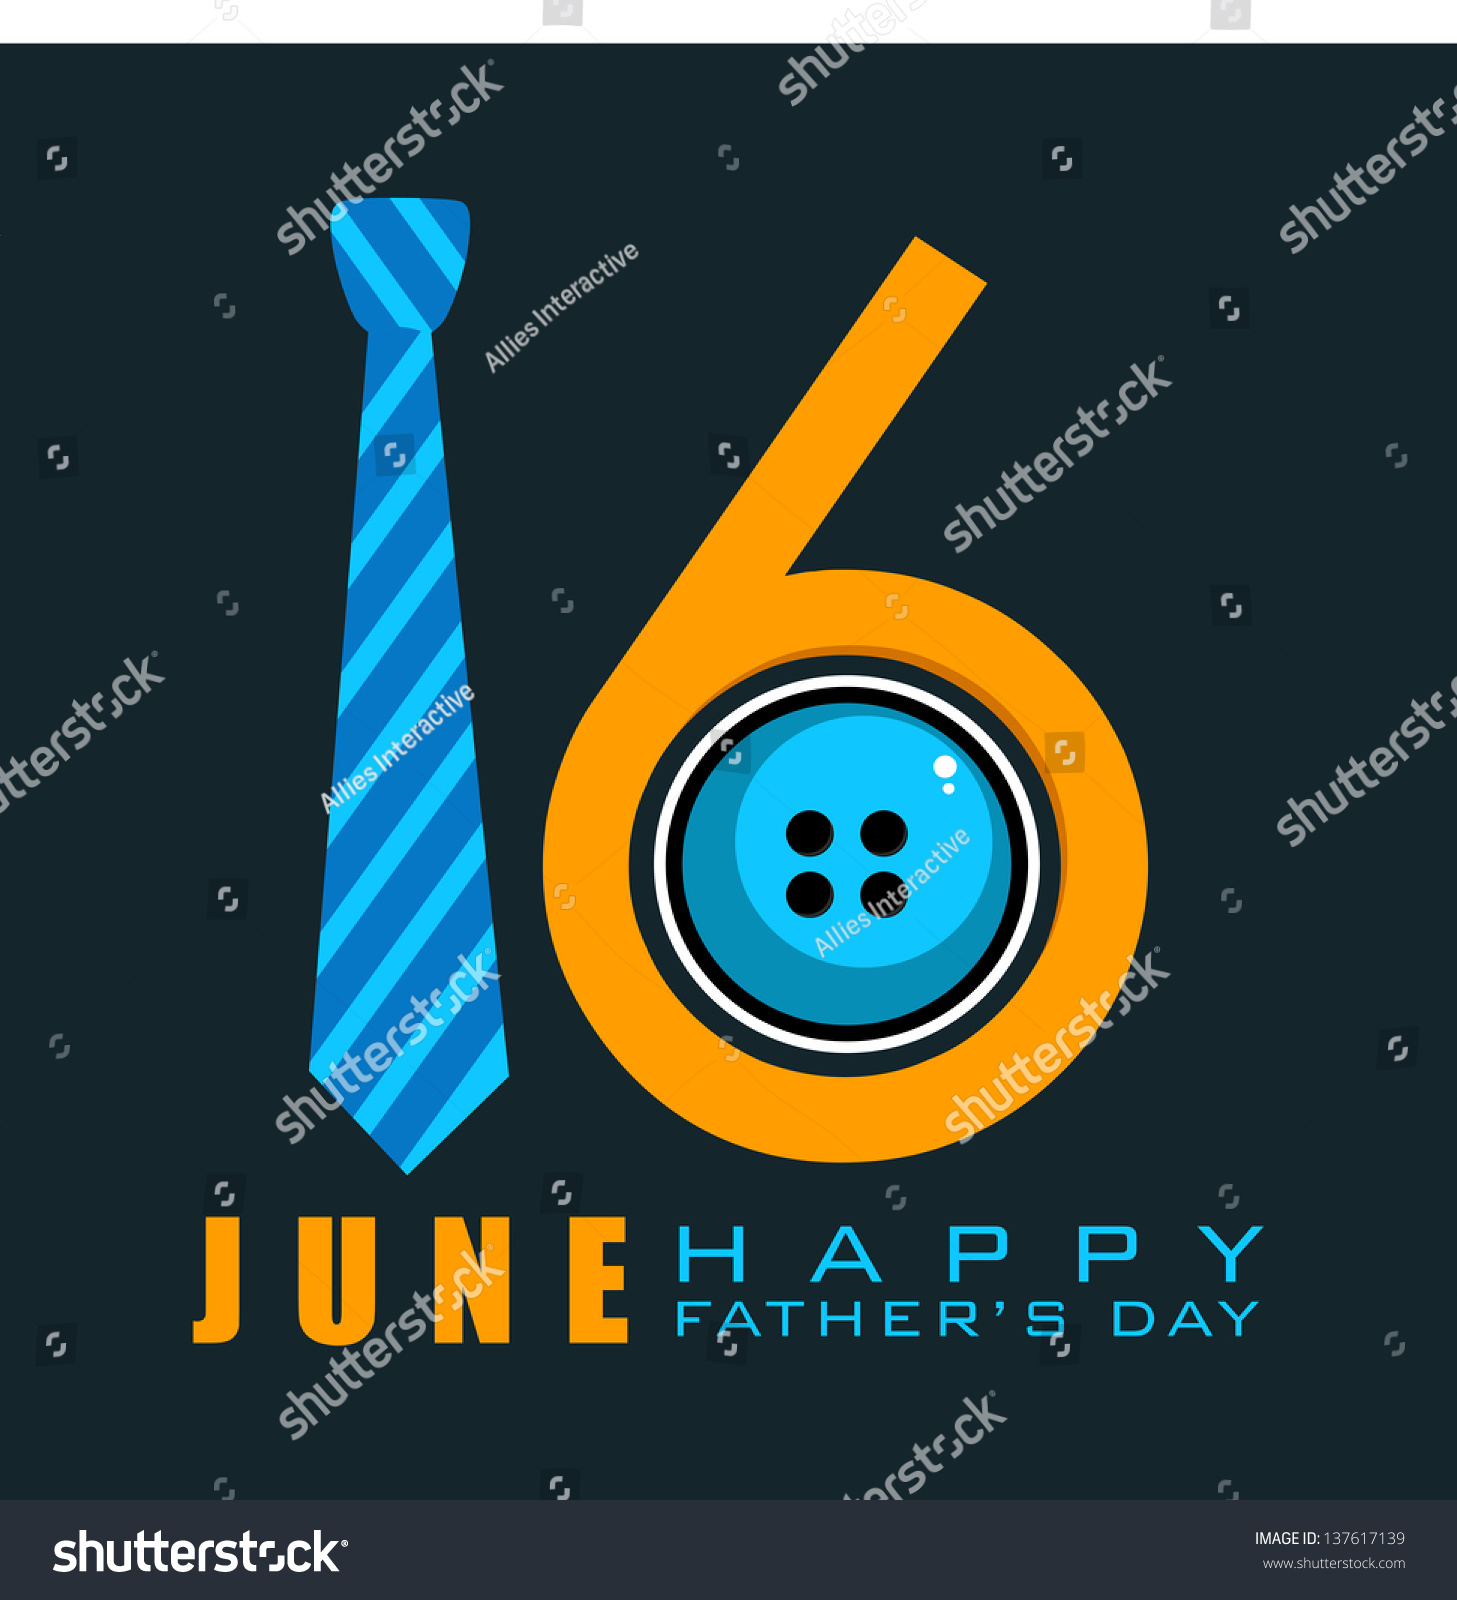 Happy Fathers Day Concept With Text 16 June Made By A Necktie And